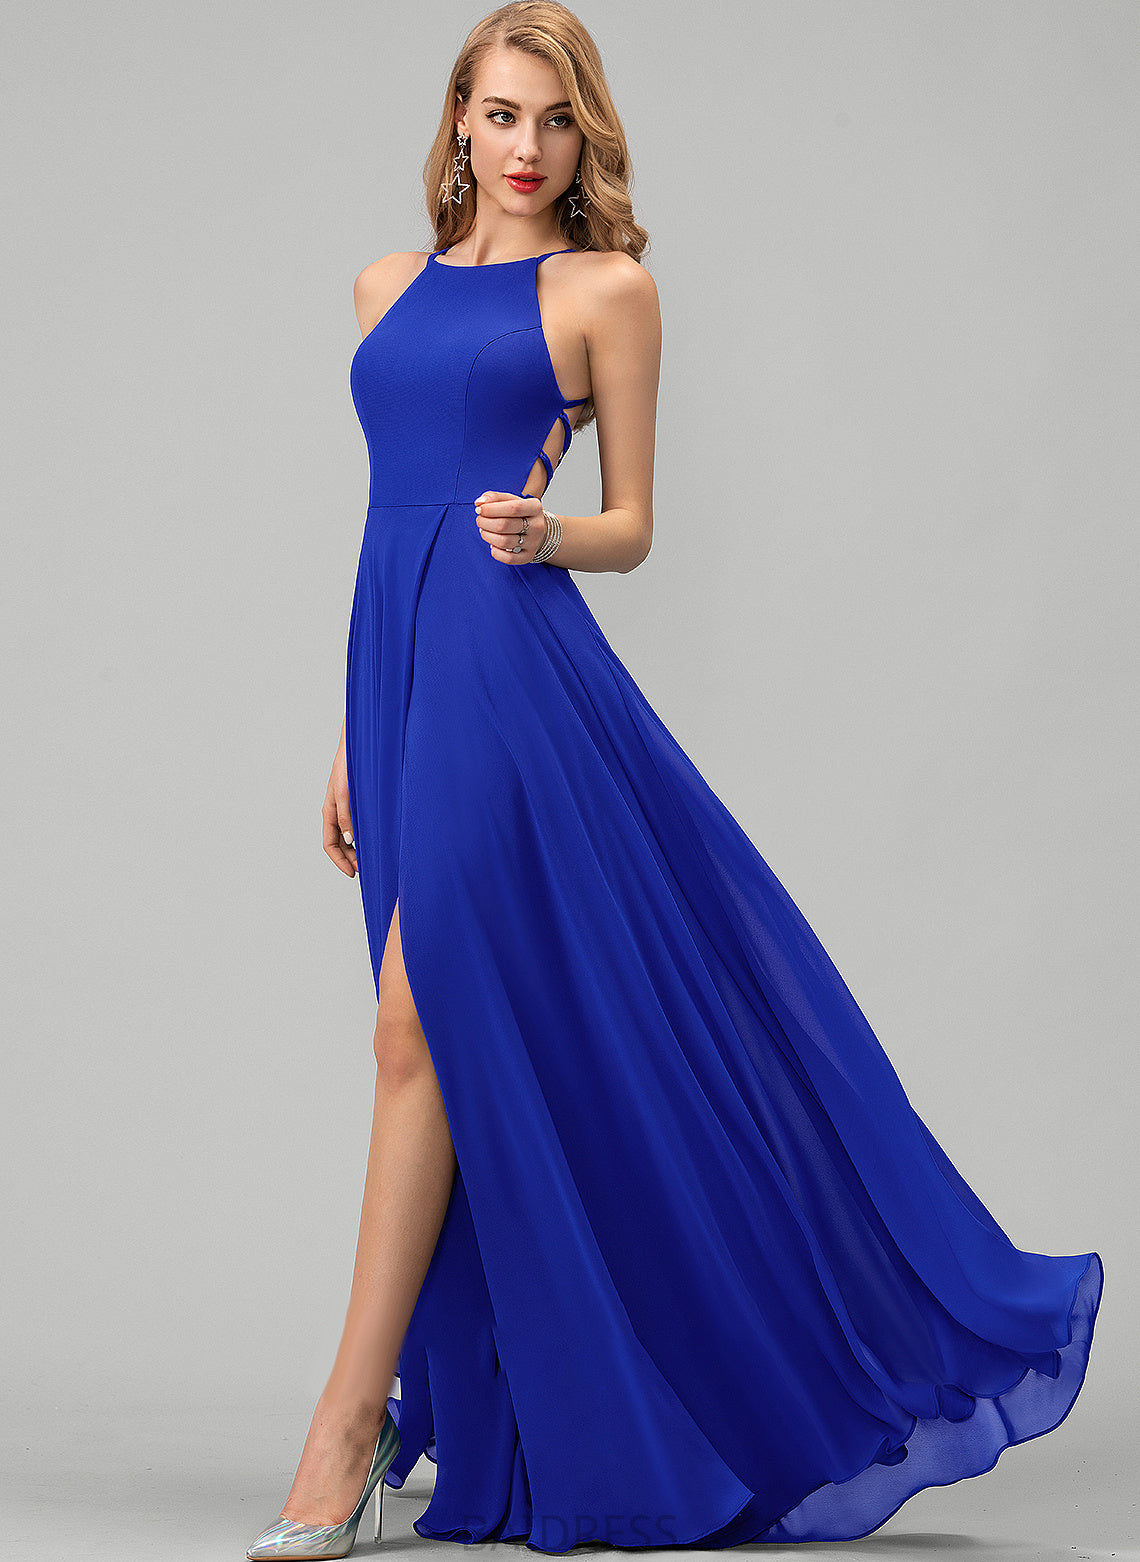 Front Neck Split Scoop Chiffon Prom Dresses Floor-Length With A-Line Holly